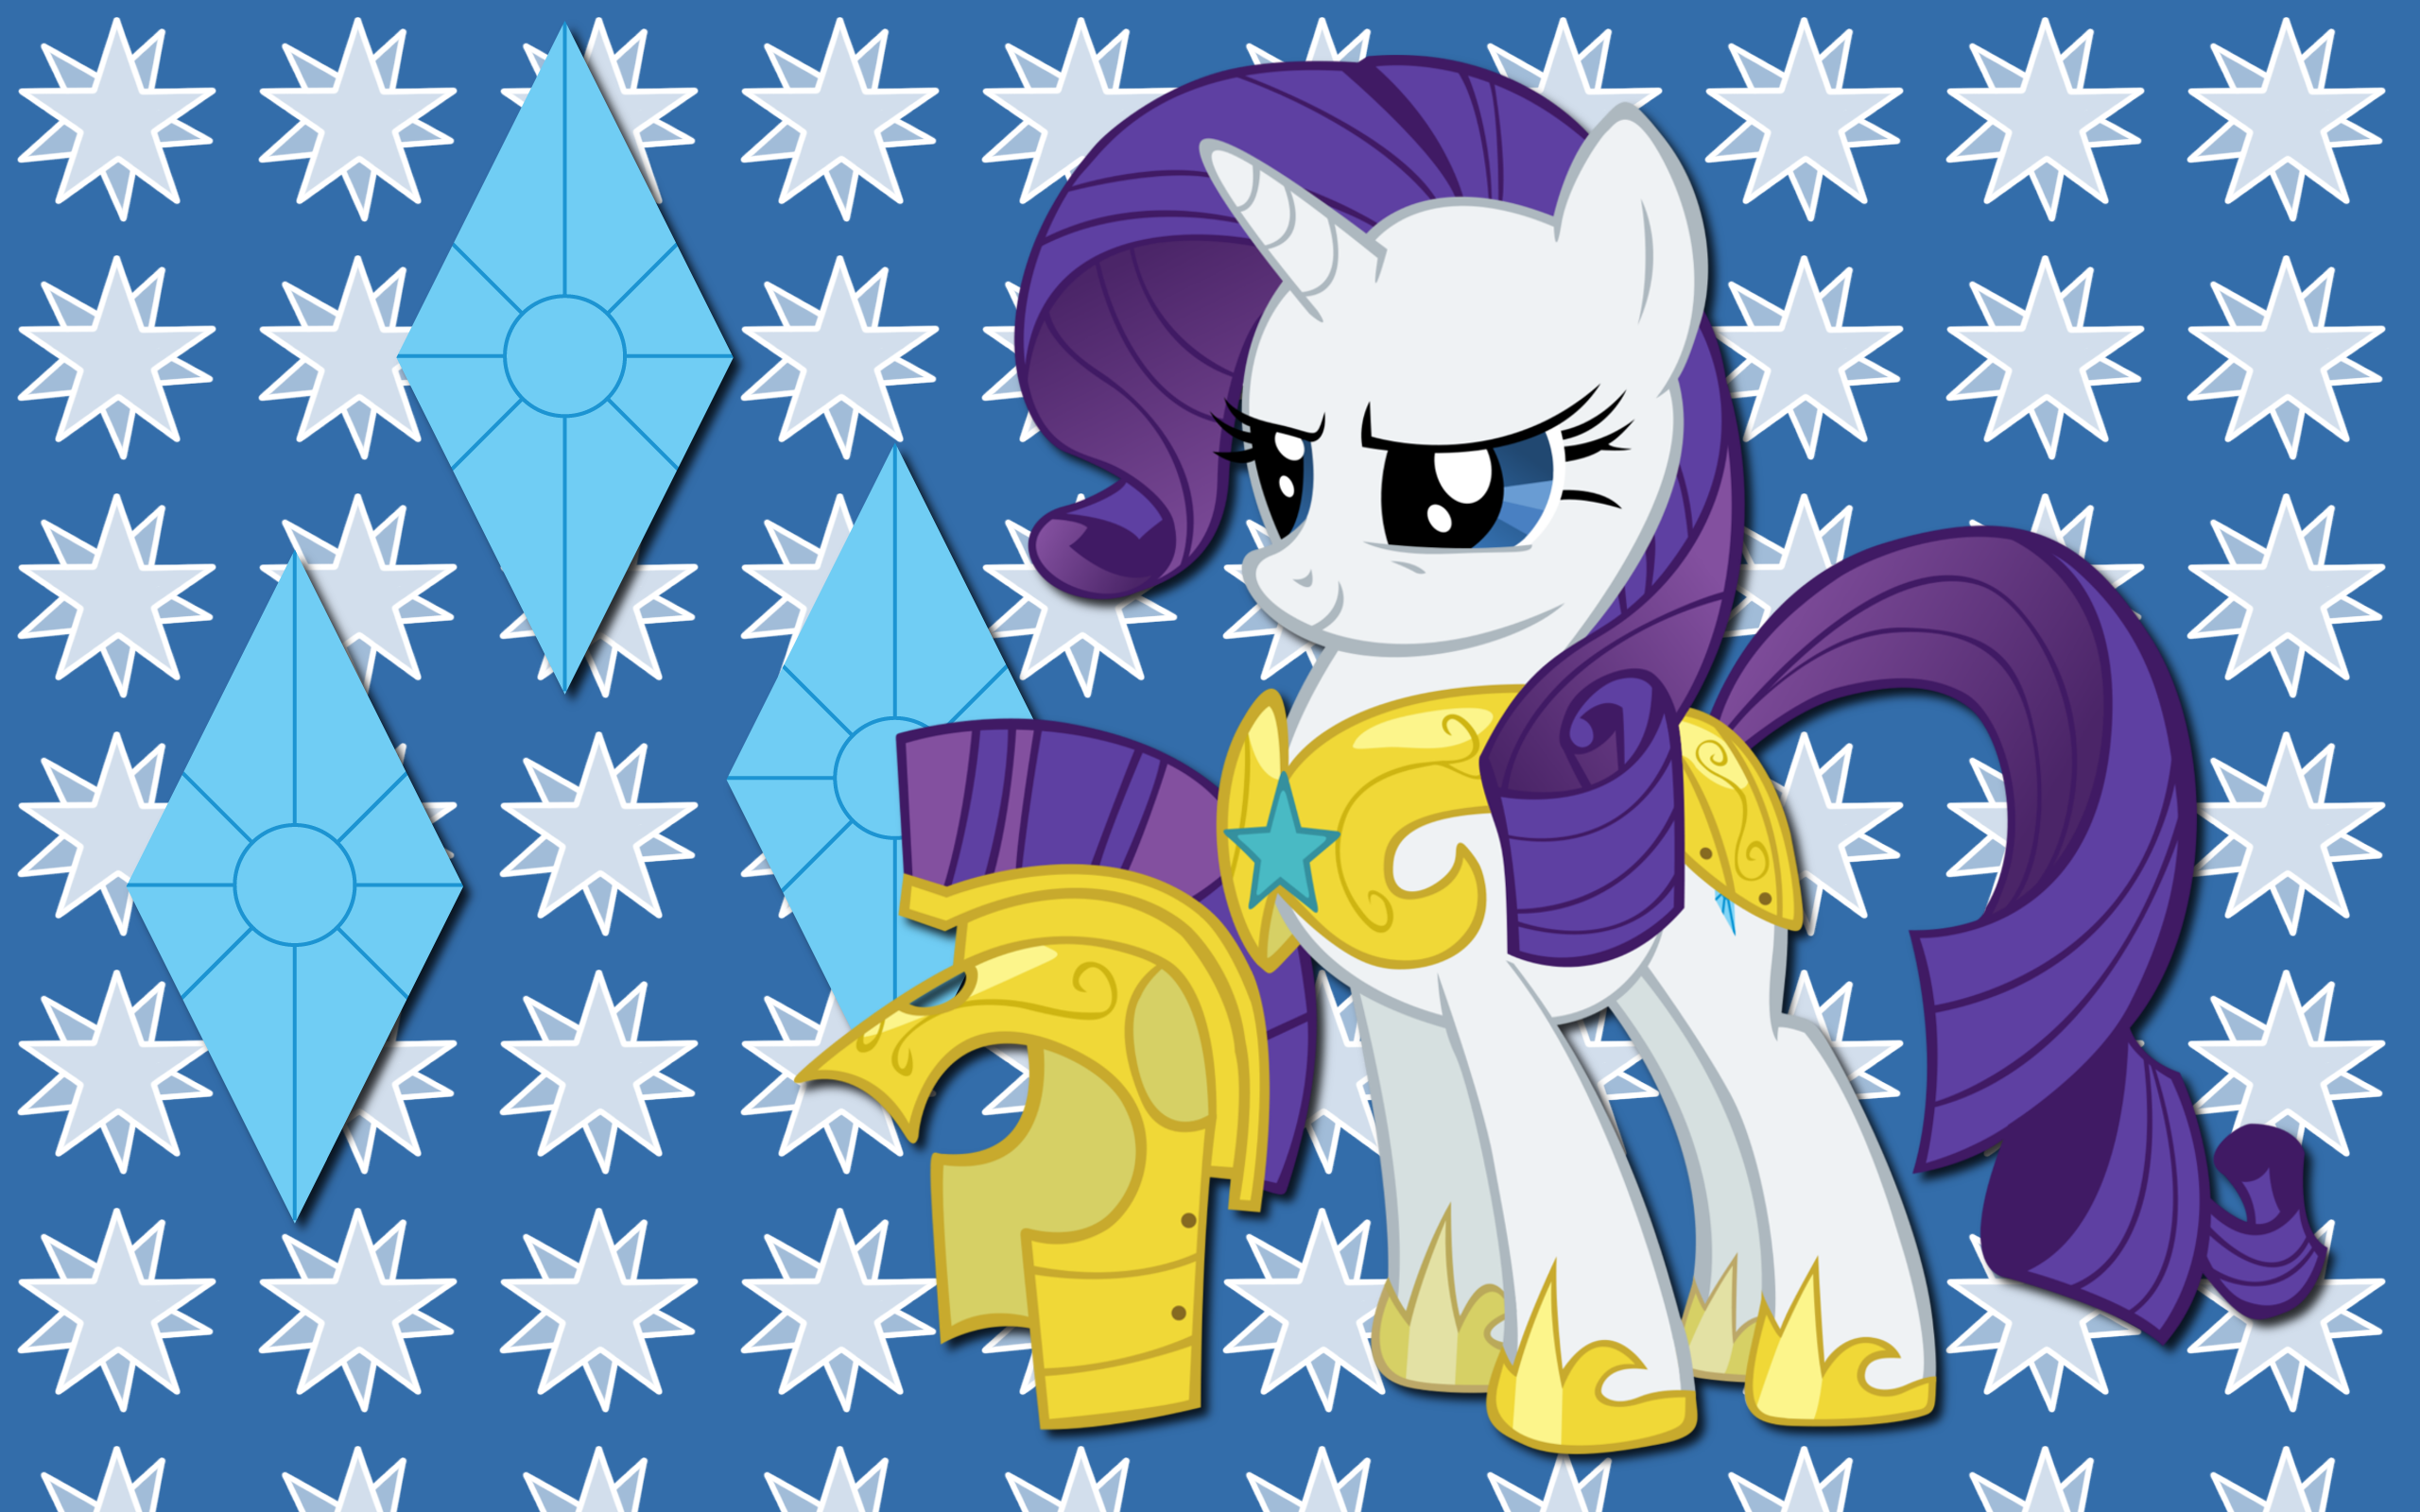 Guard Rarity WP by AliceHumanSacrifice0, ooklah and Spaceponies